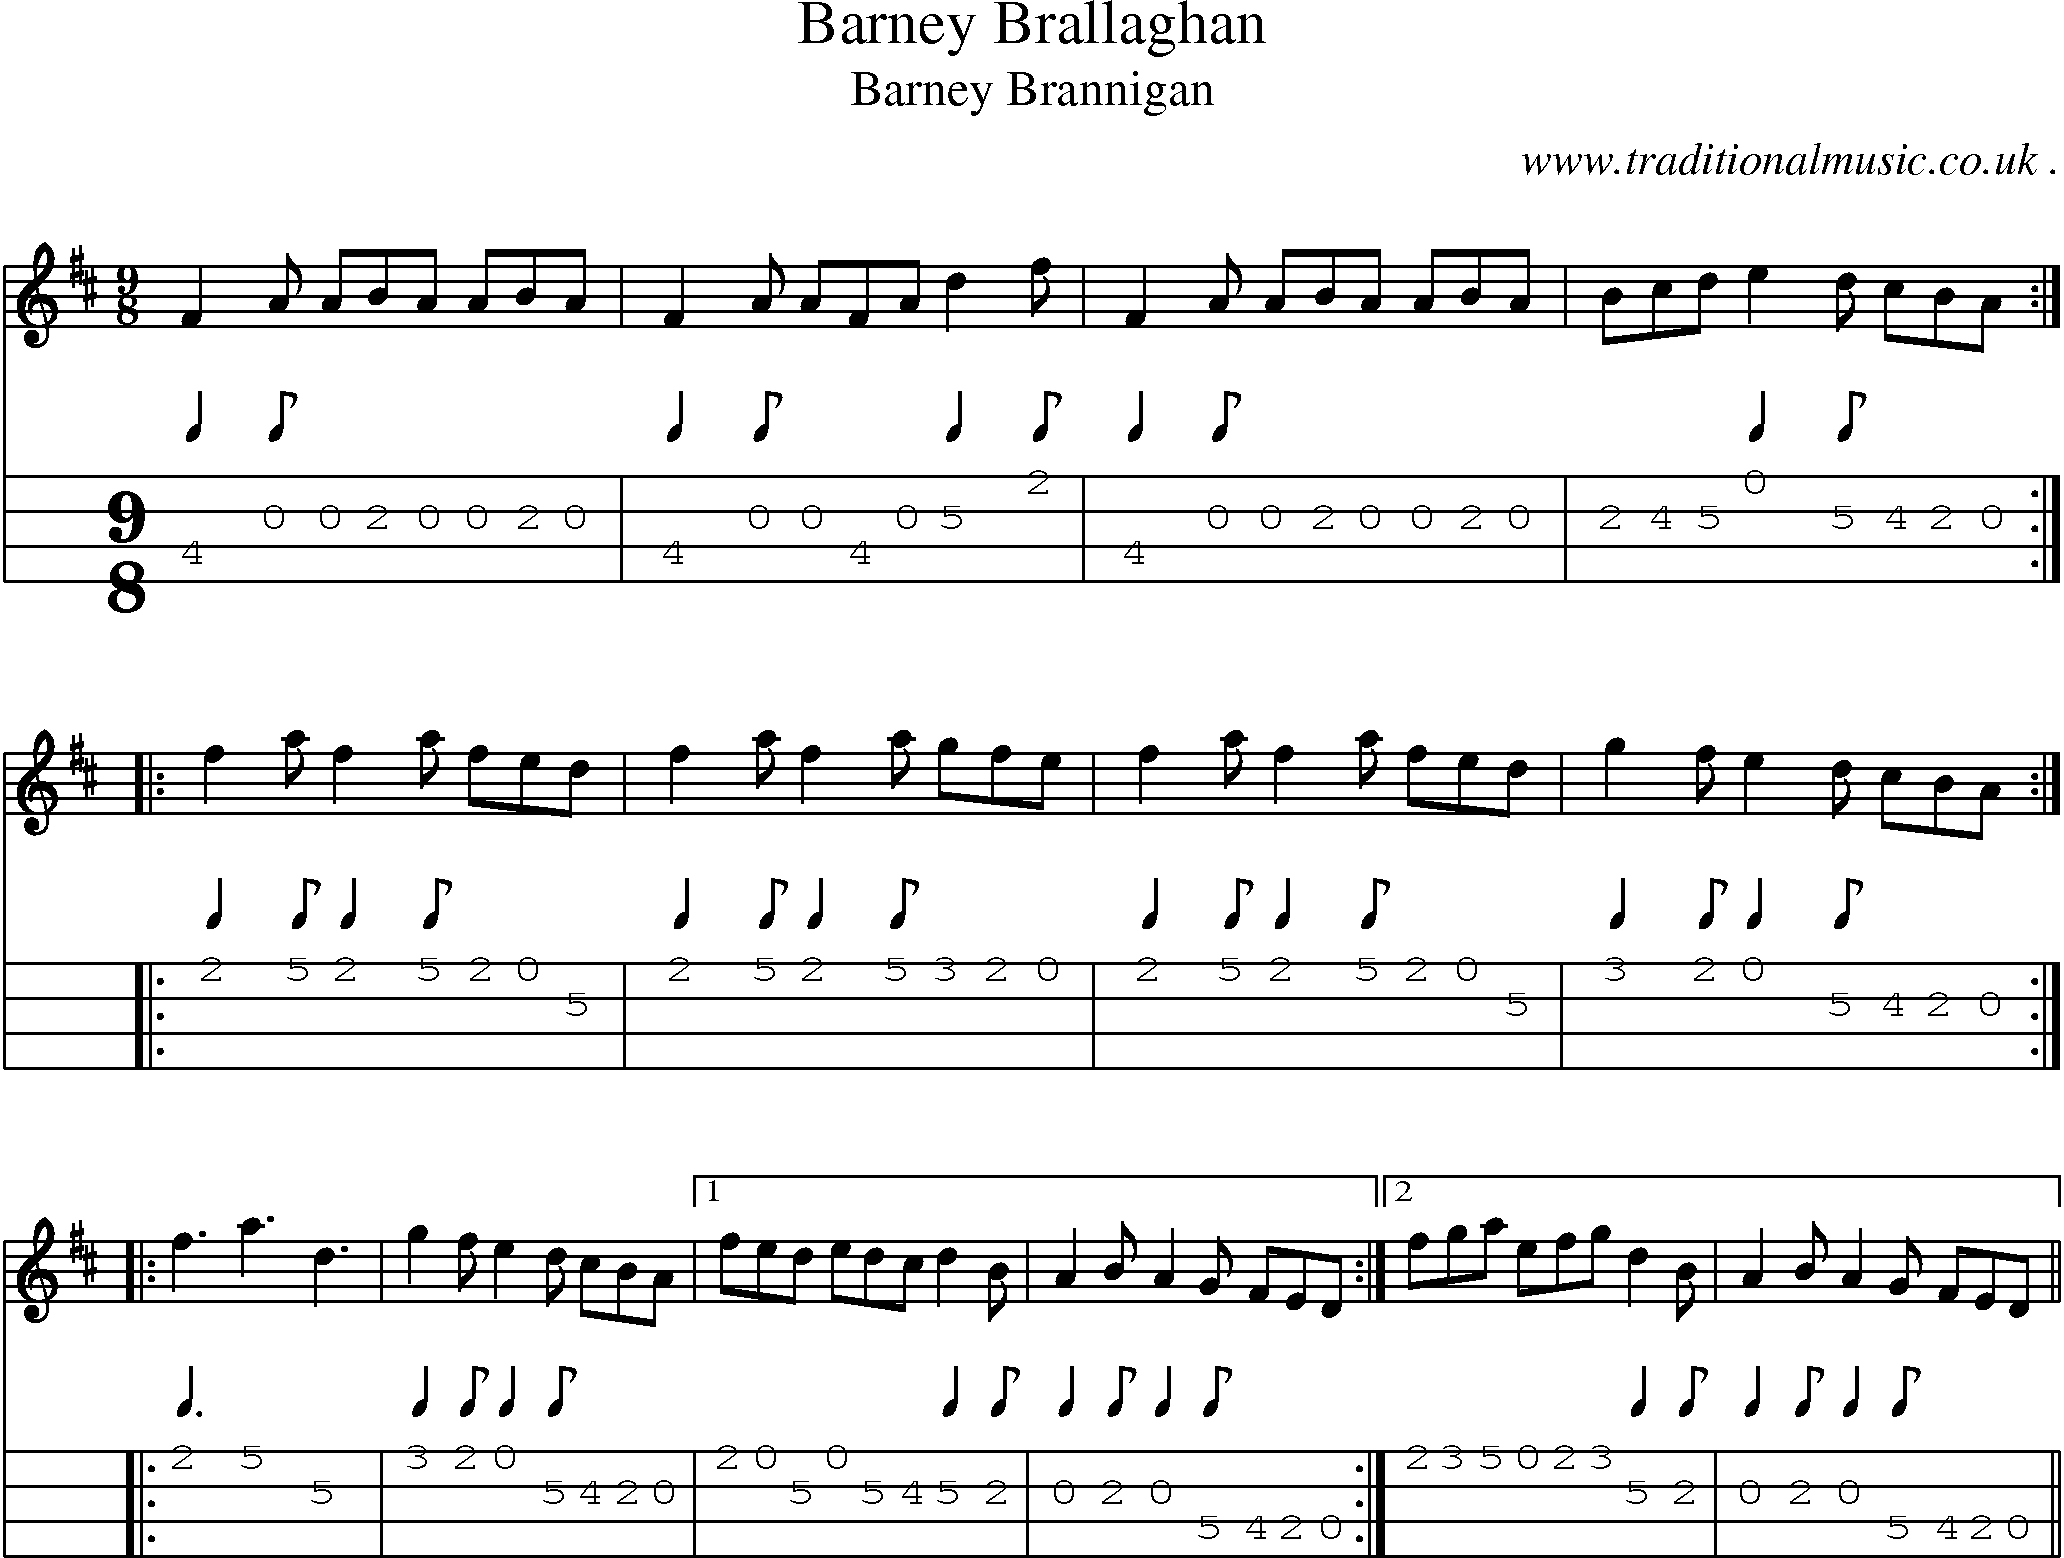 Sheet-Music and Mandolin Tabs for Barney Brallaghan